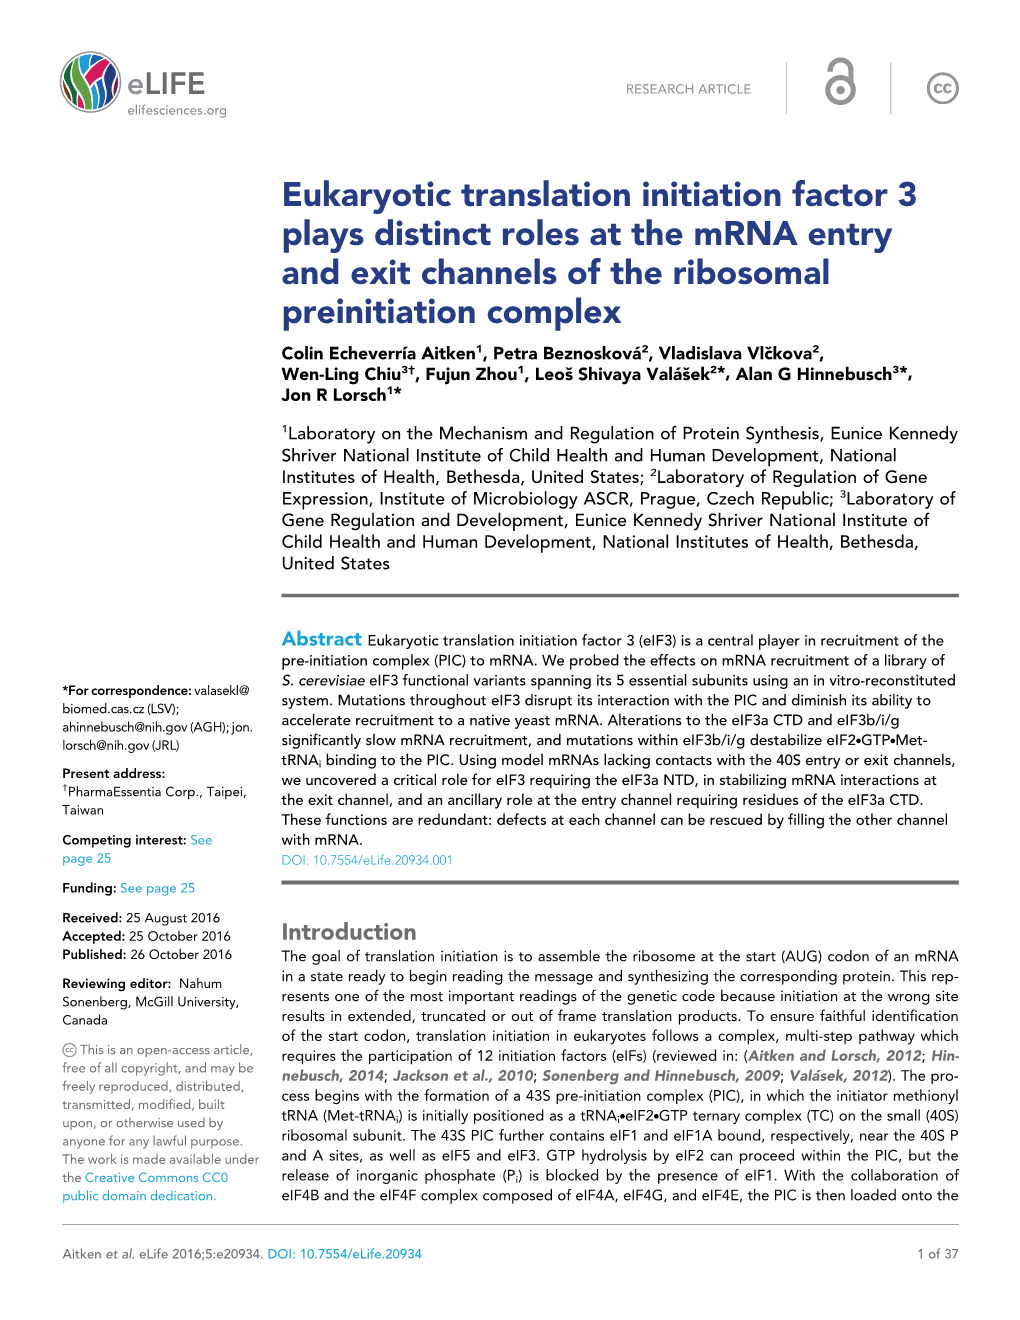 Eukaryotic Translation Initiation Factor 3 Plays Distinct Roles at The